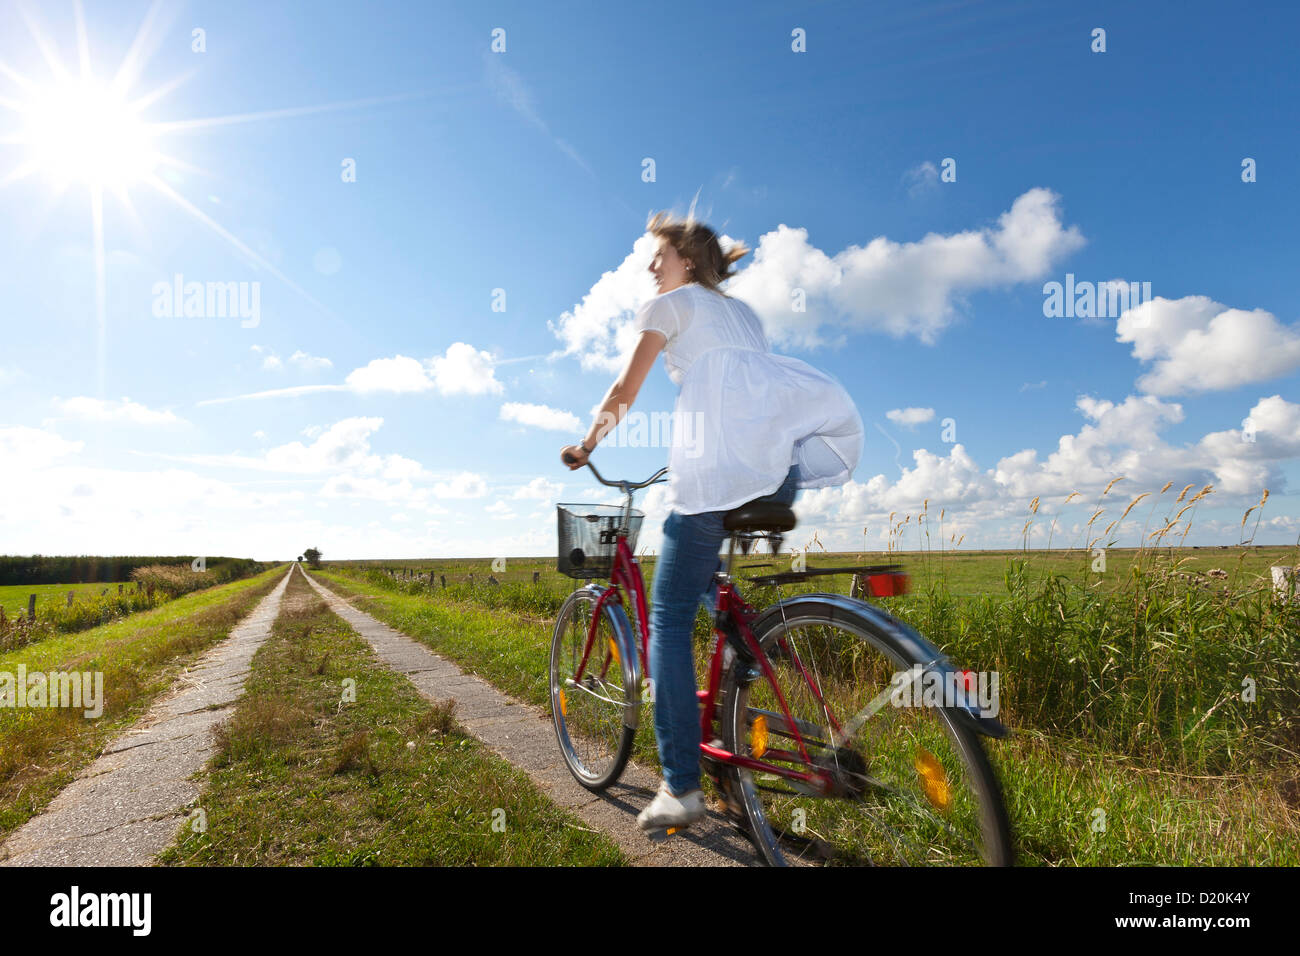 Young woman on bicycle in salt march, Wadden lands, North Sea coast, Lower Saxony, Germany, Europe Stock Photo